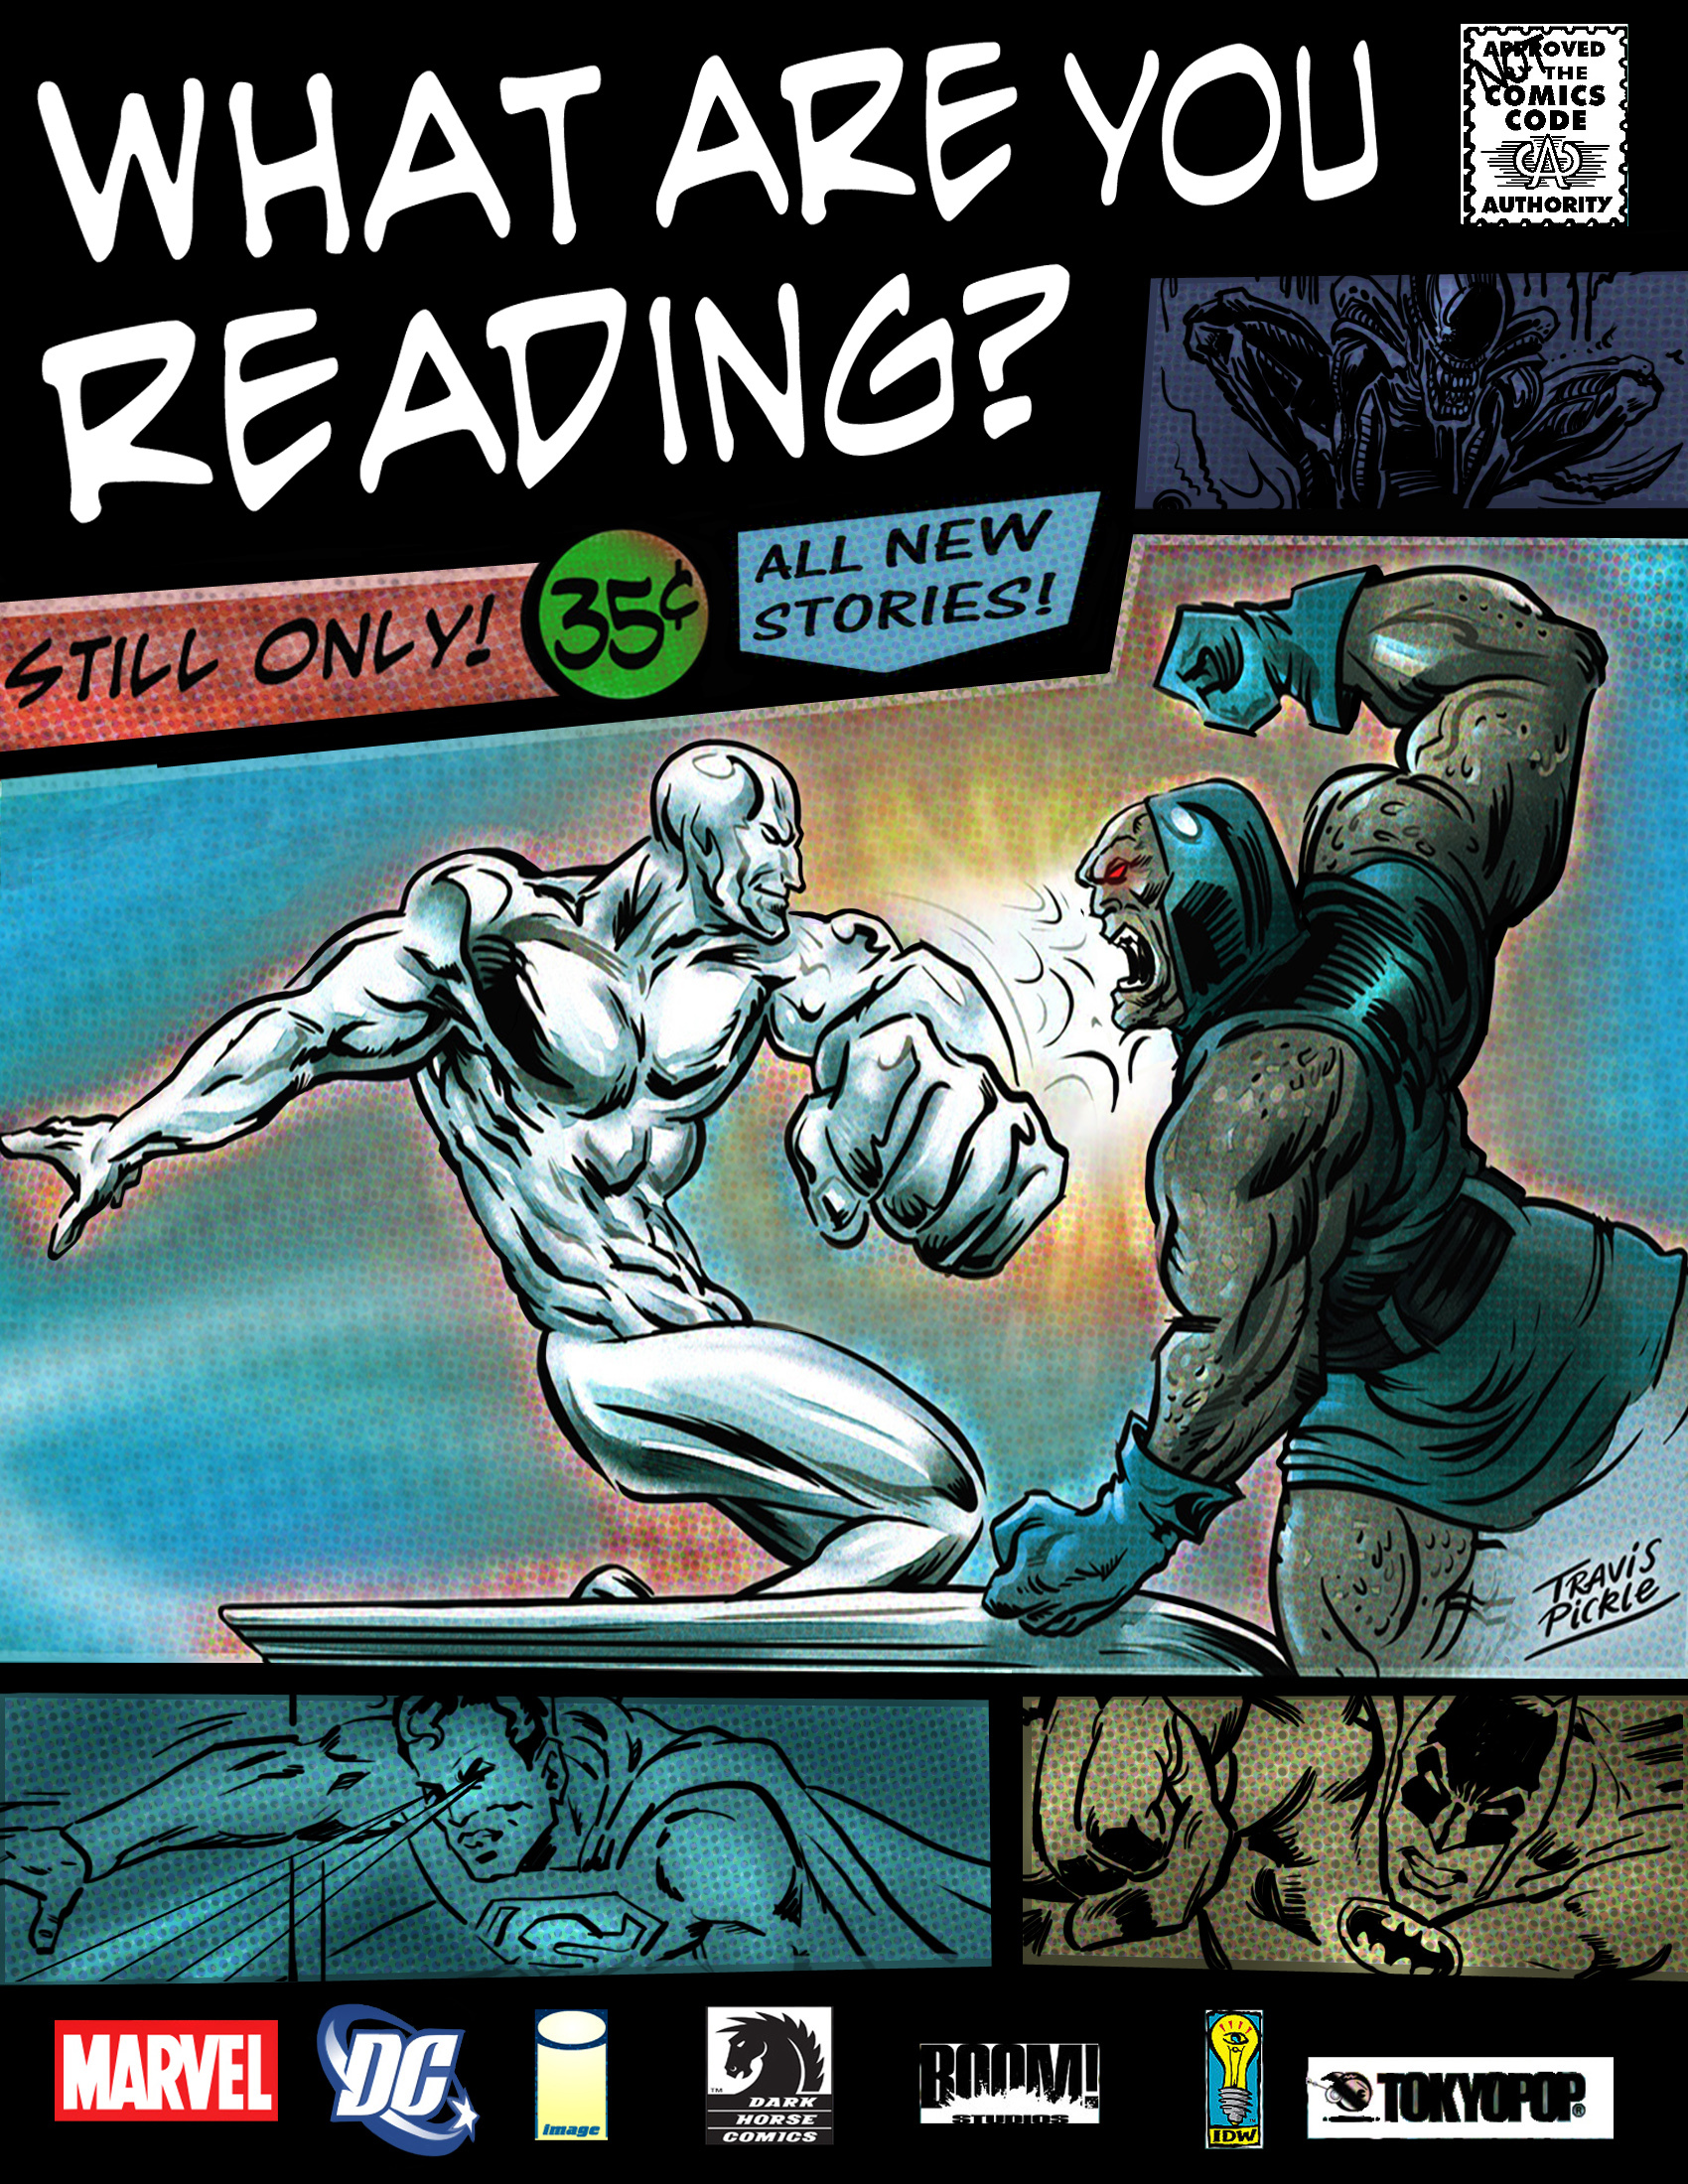 What Are You Reading? - Volume 6 Issue 26